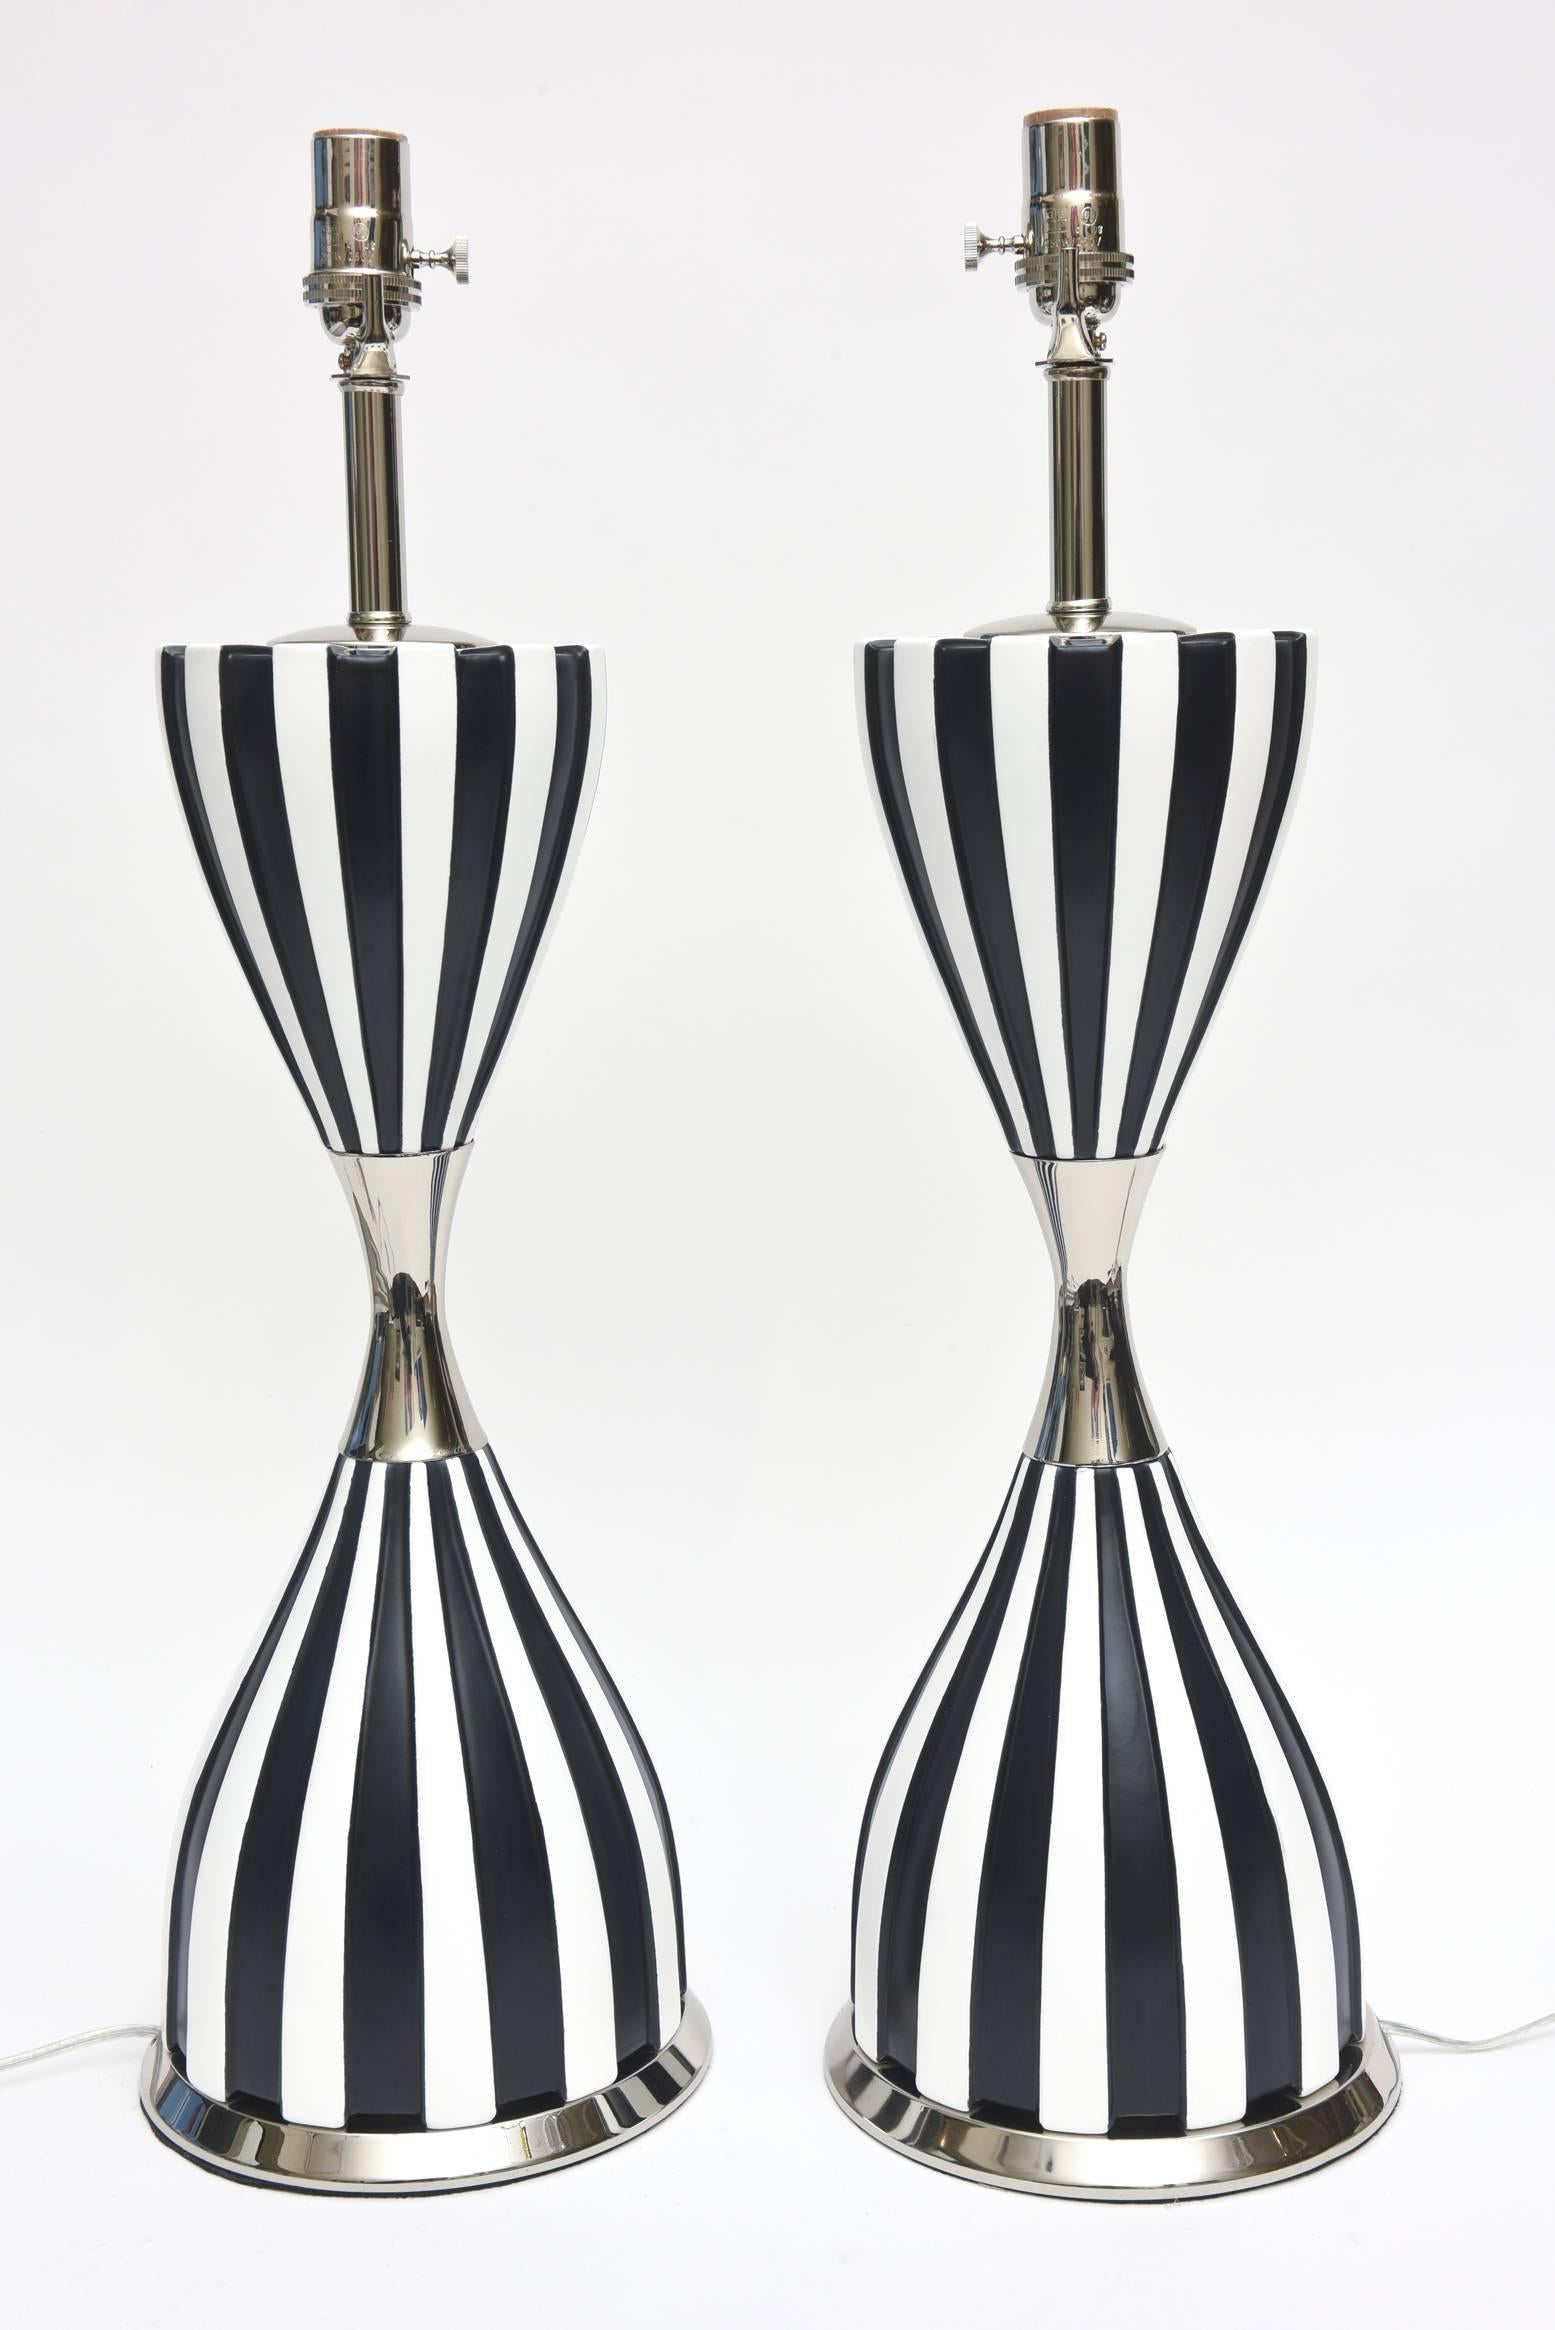 These dramatic and arresting black and white Laurel Mid-Century Modern ceramic lamps with nickel silver appointments and hardware have all been restored. We have now made them look more modern to the 21st century now and many costs have go into the